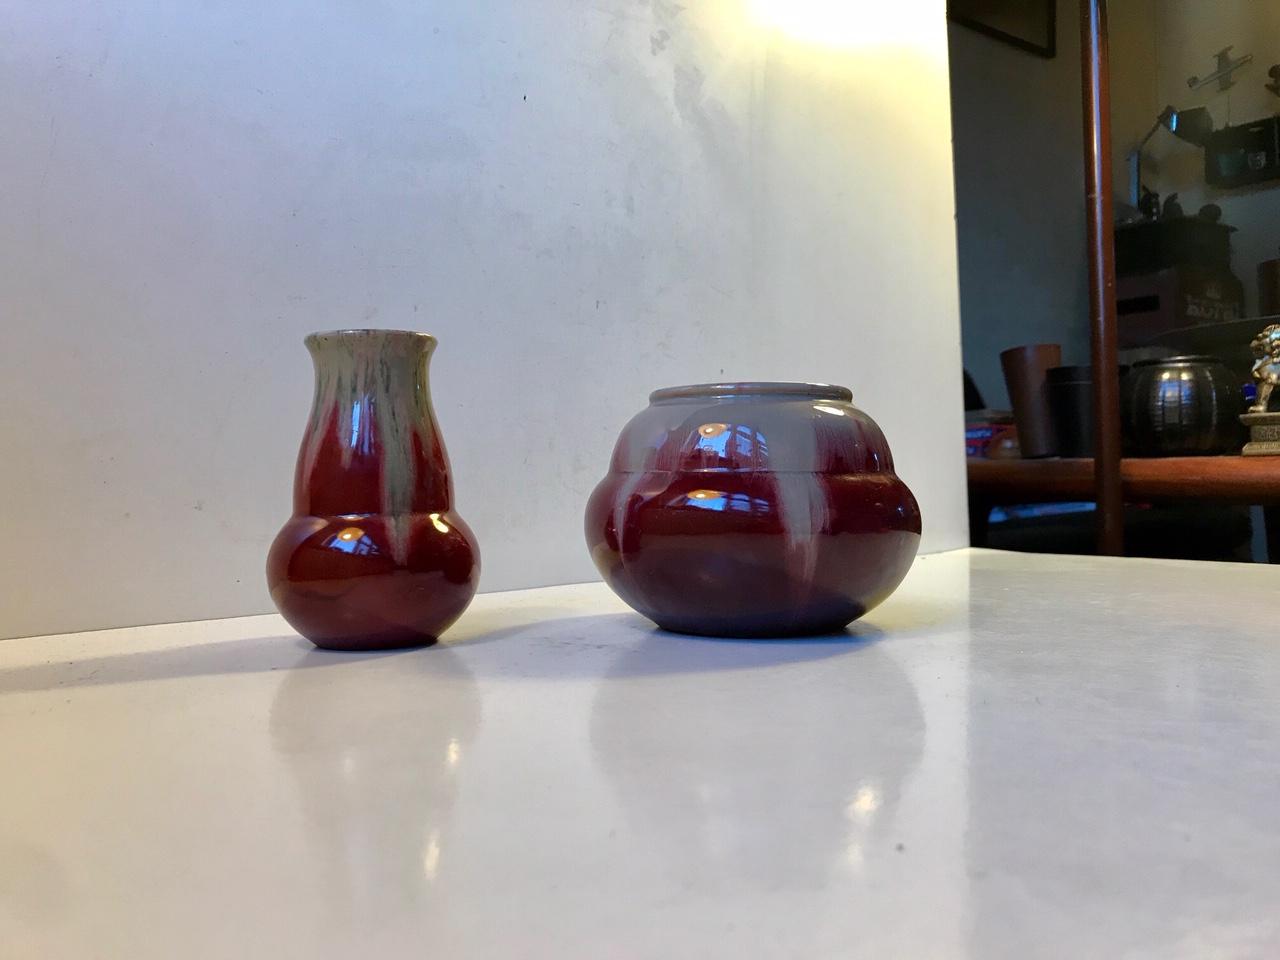 Danish 1930s ceramic vases displaying exceptional techniques in glazes, subtle Art Nouveau/Art Deco styling and shape. Michael Andersen's son Daniel won the Gold Medal at the World's Fair in Brussel in 1935. These pieces were designed by him.